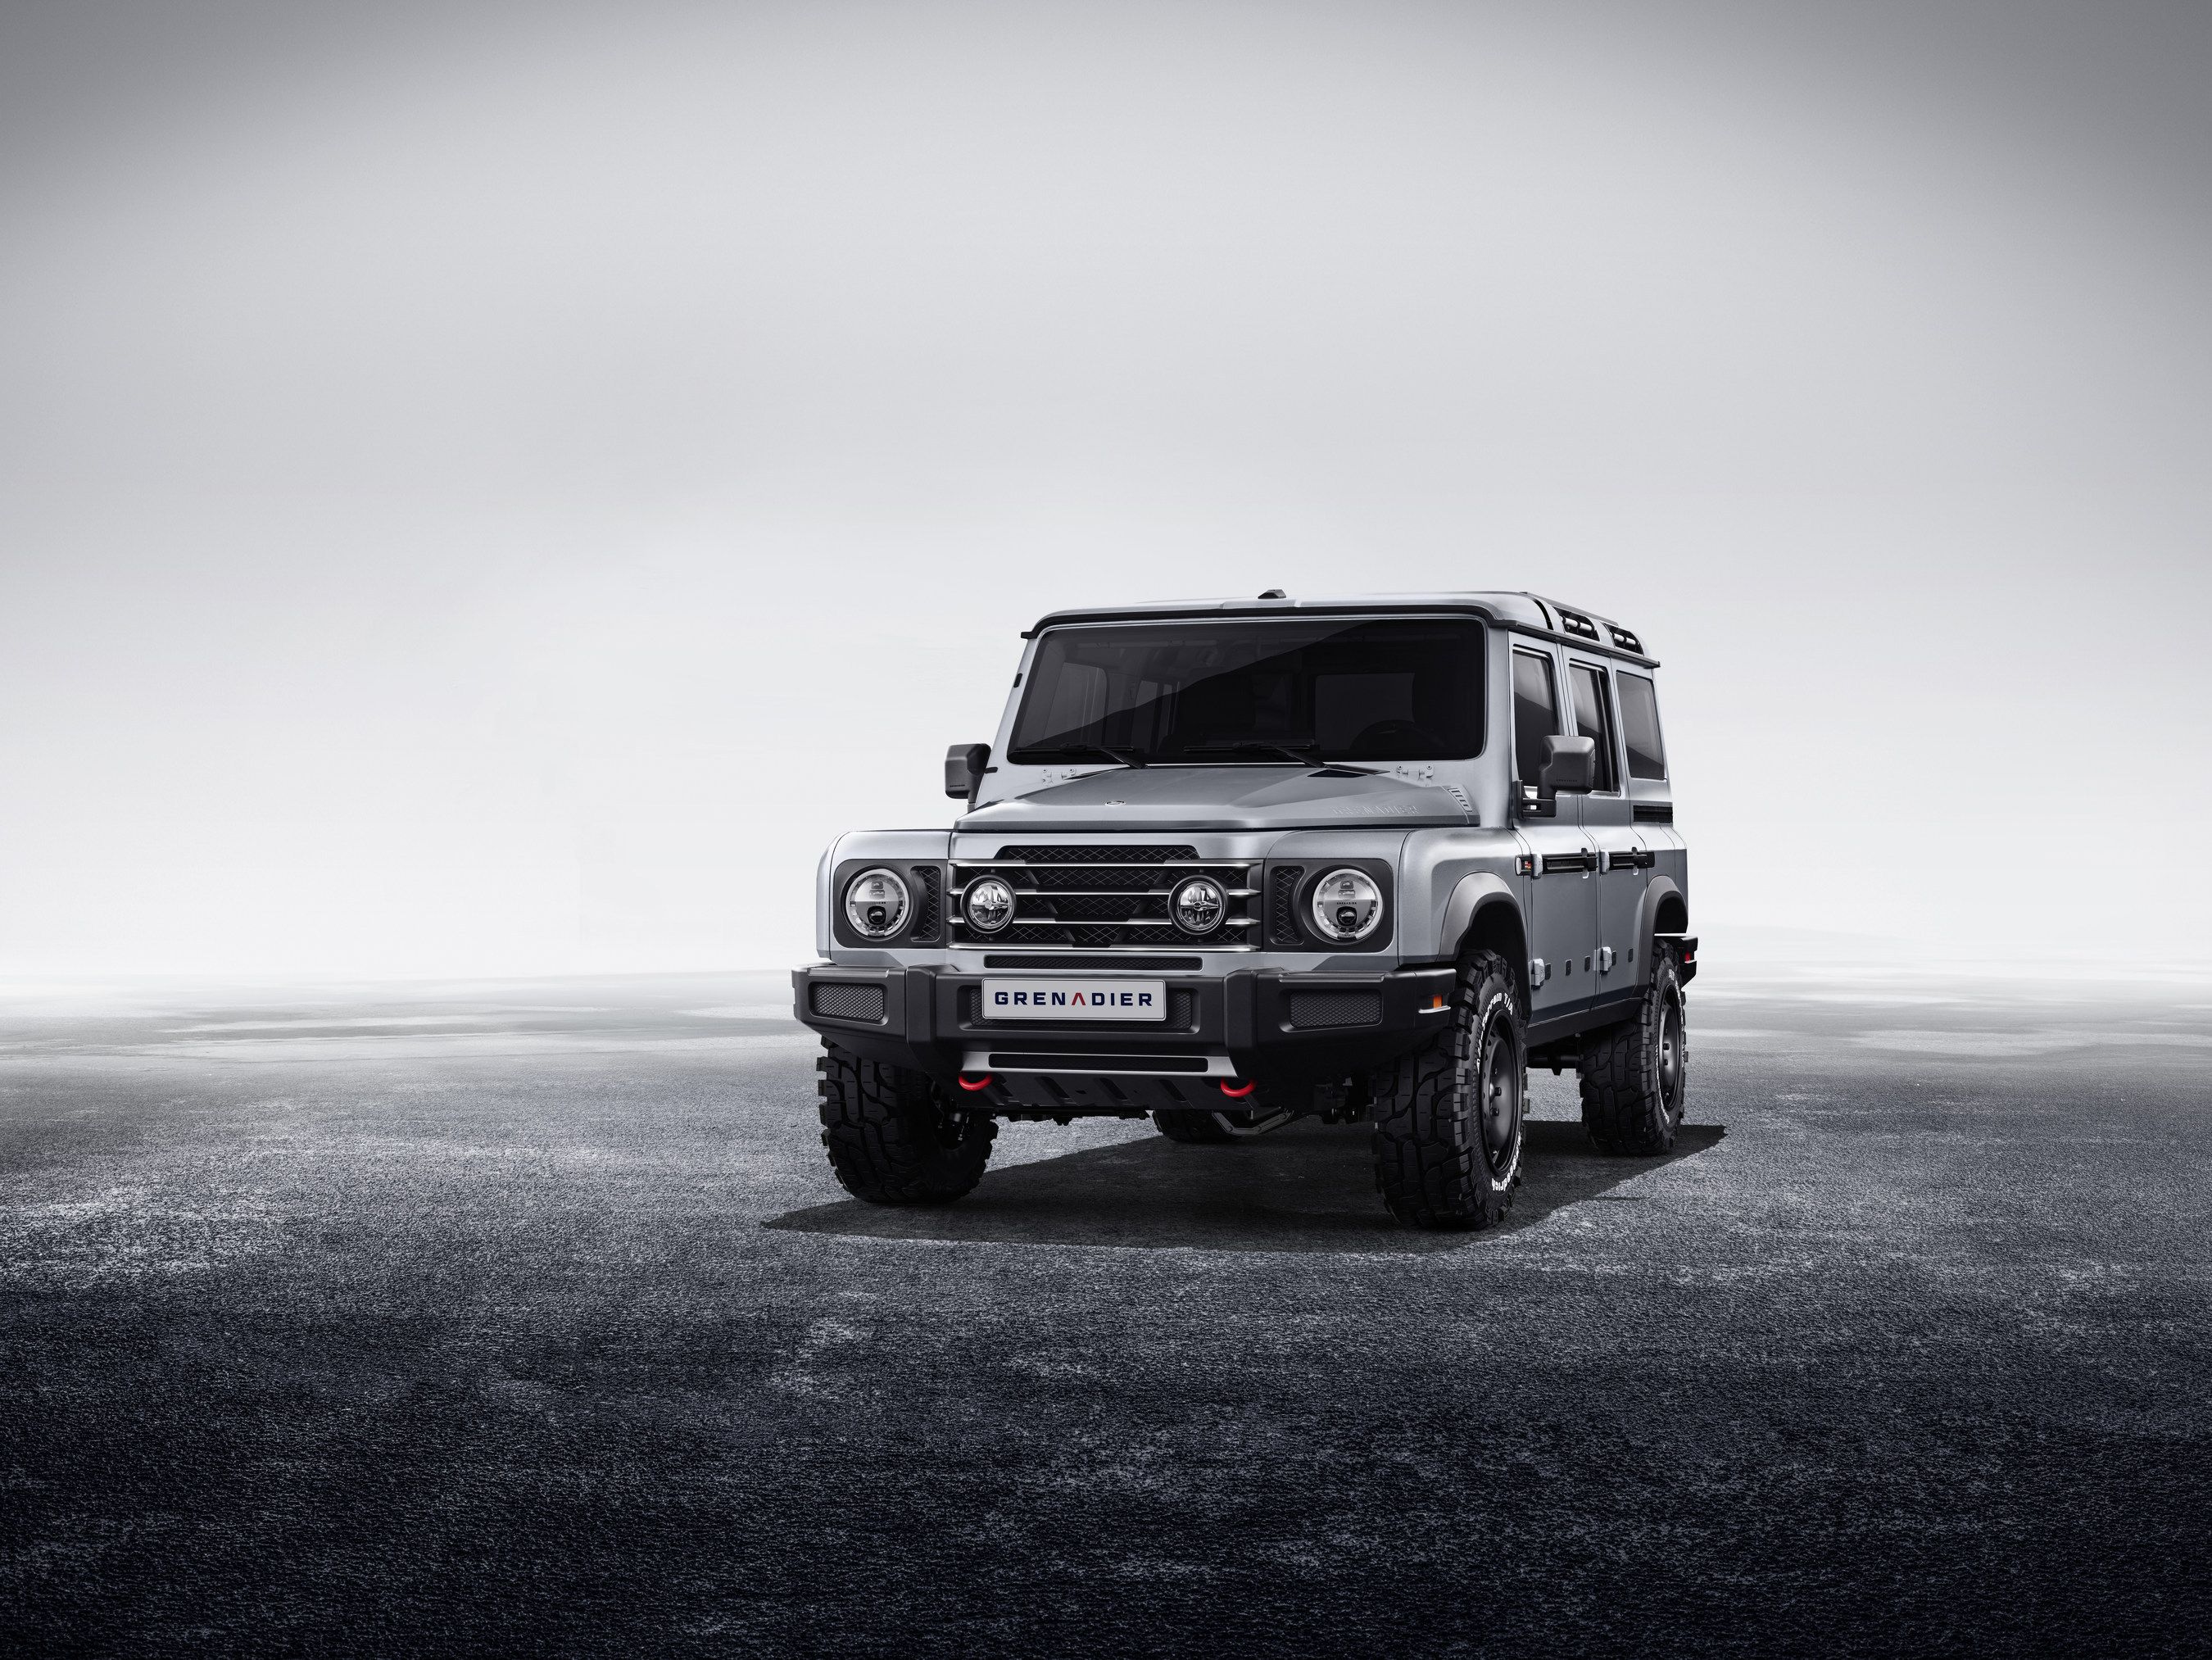 Land Rover Defender: nothing like the old one but that's fine with me